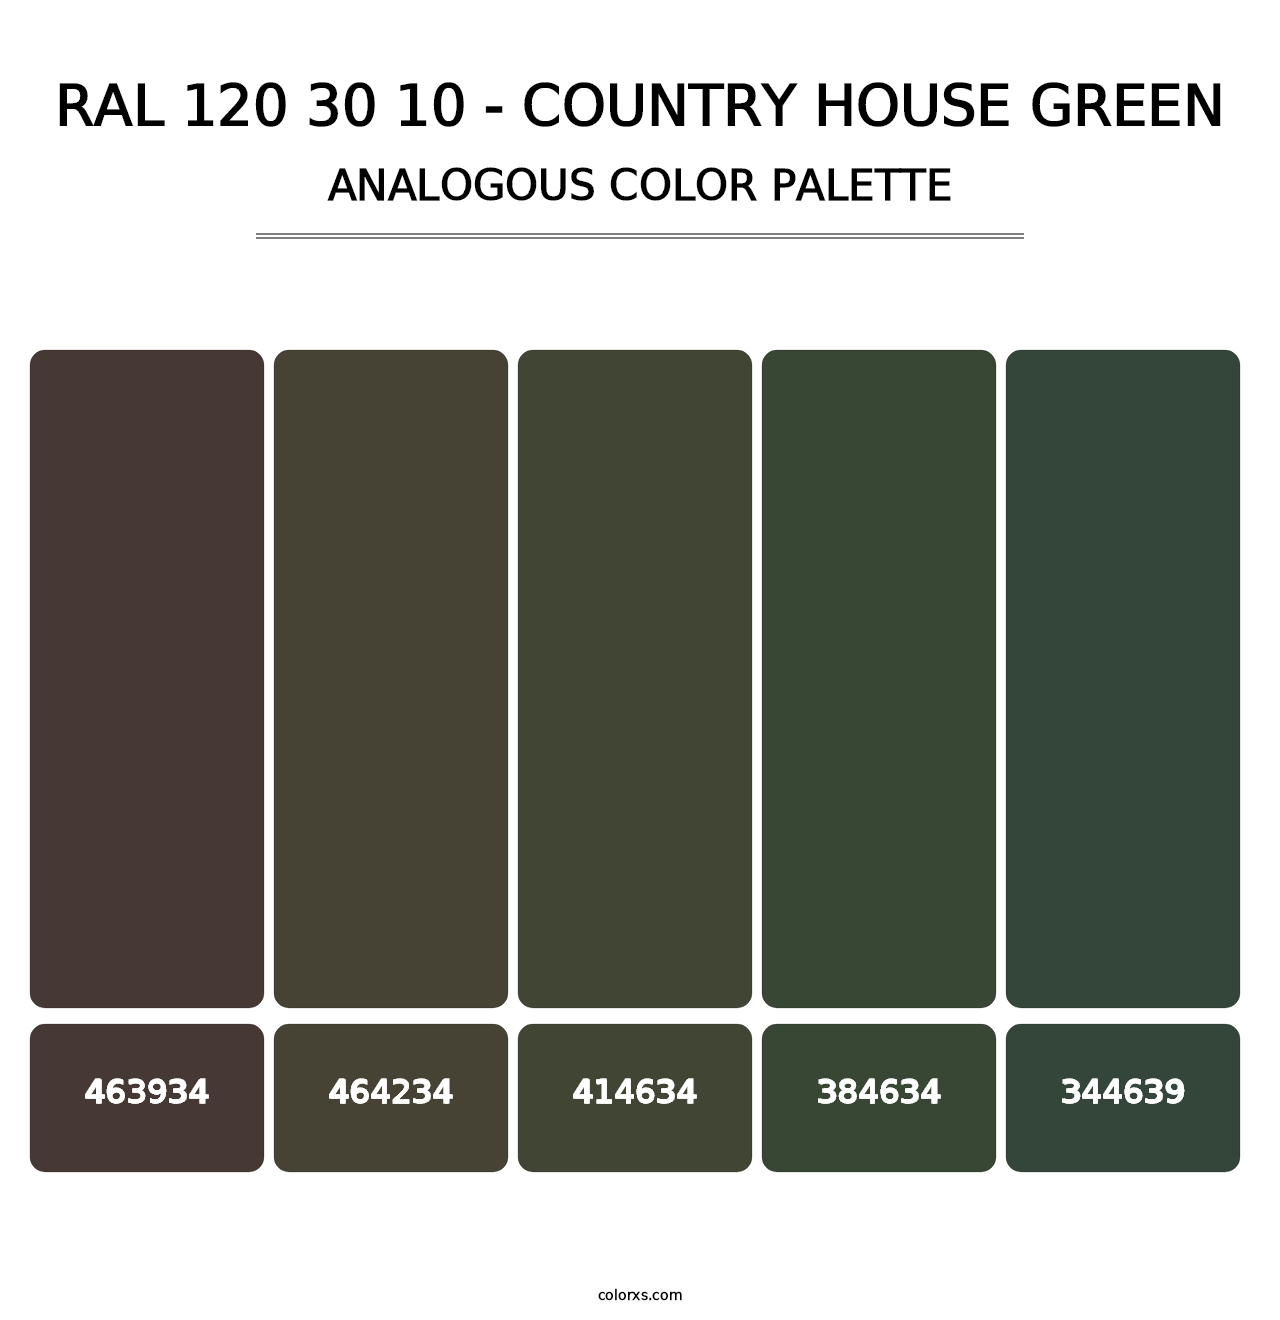 RAL 120 30 10 - Country House Green - Analogous Color Palette